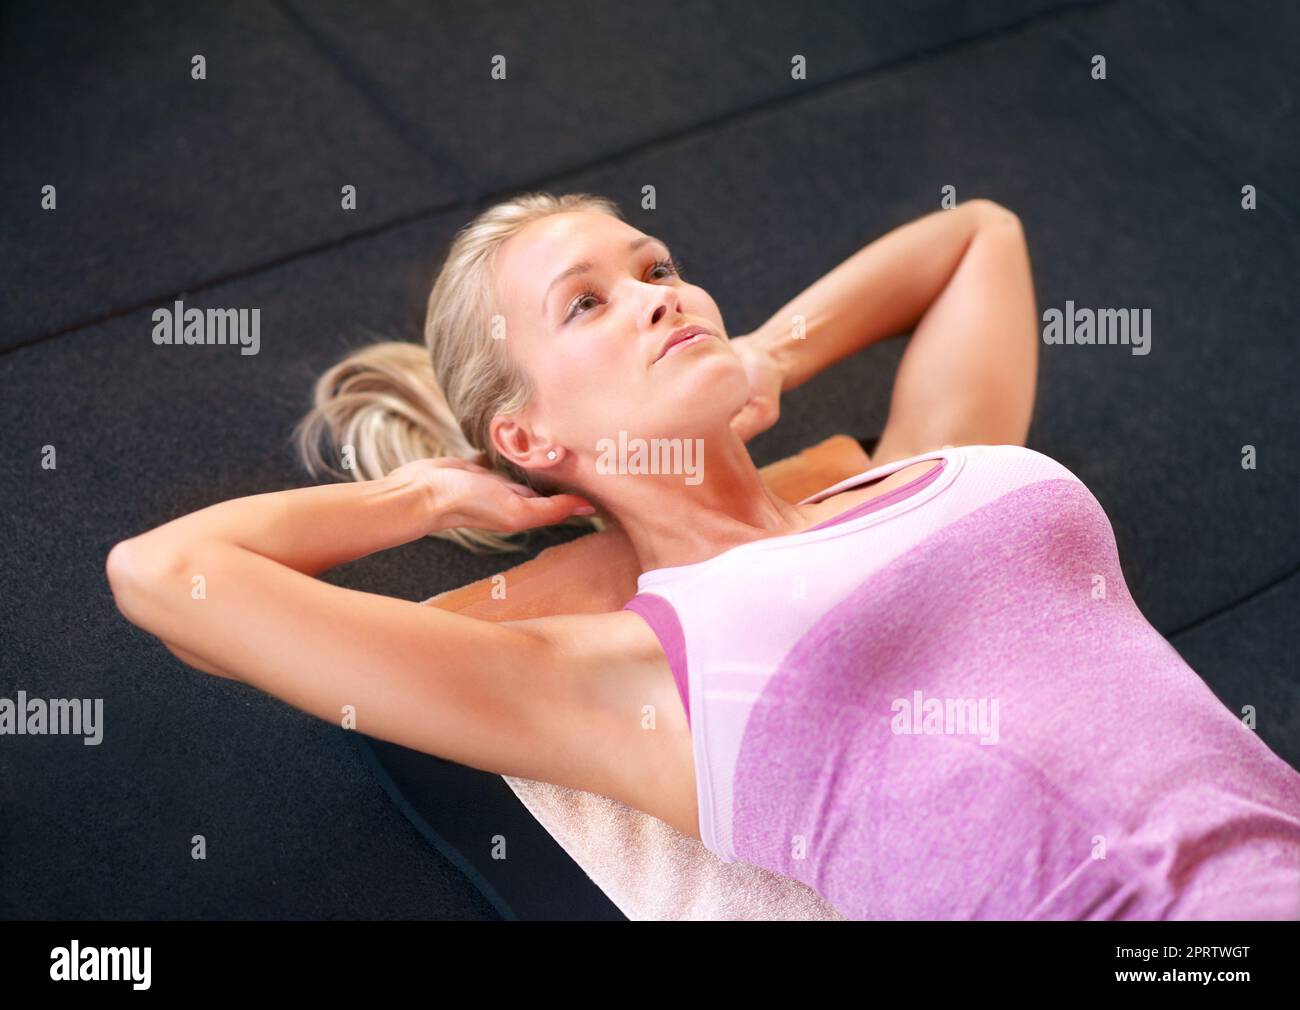 https://c8.alamy.com/comp/2PRTWGT/no-negative-thoughts-allowed-a-young-woman-lifting-weights-2PRTWGT.jpg